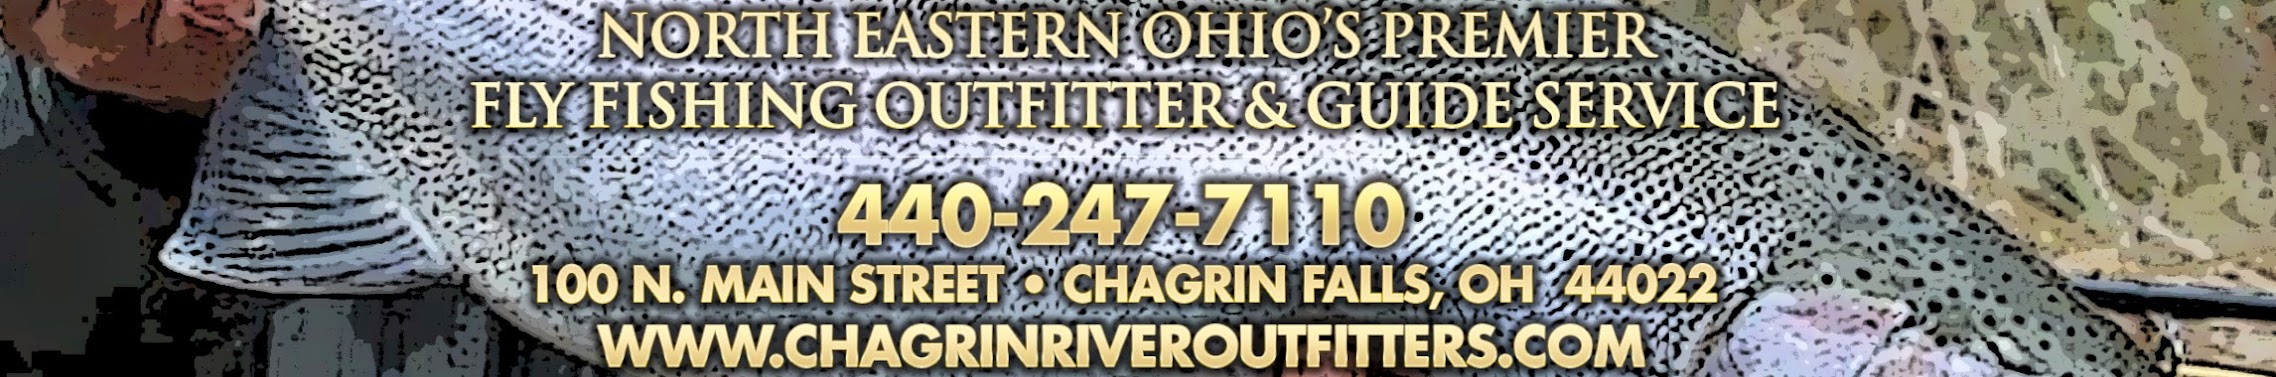 Chagrin River Outfitters 